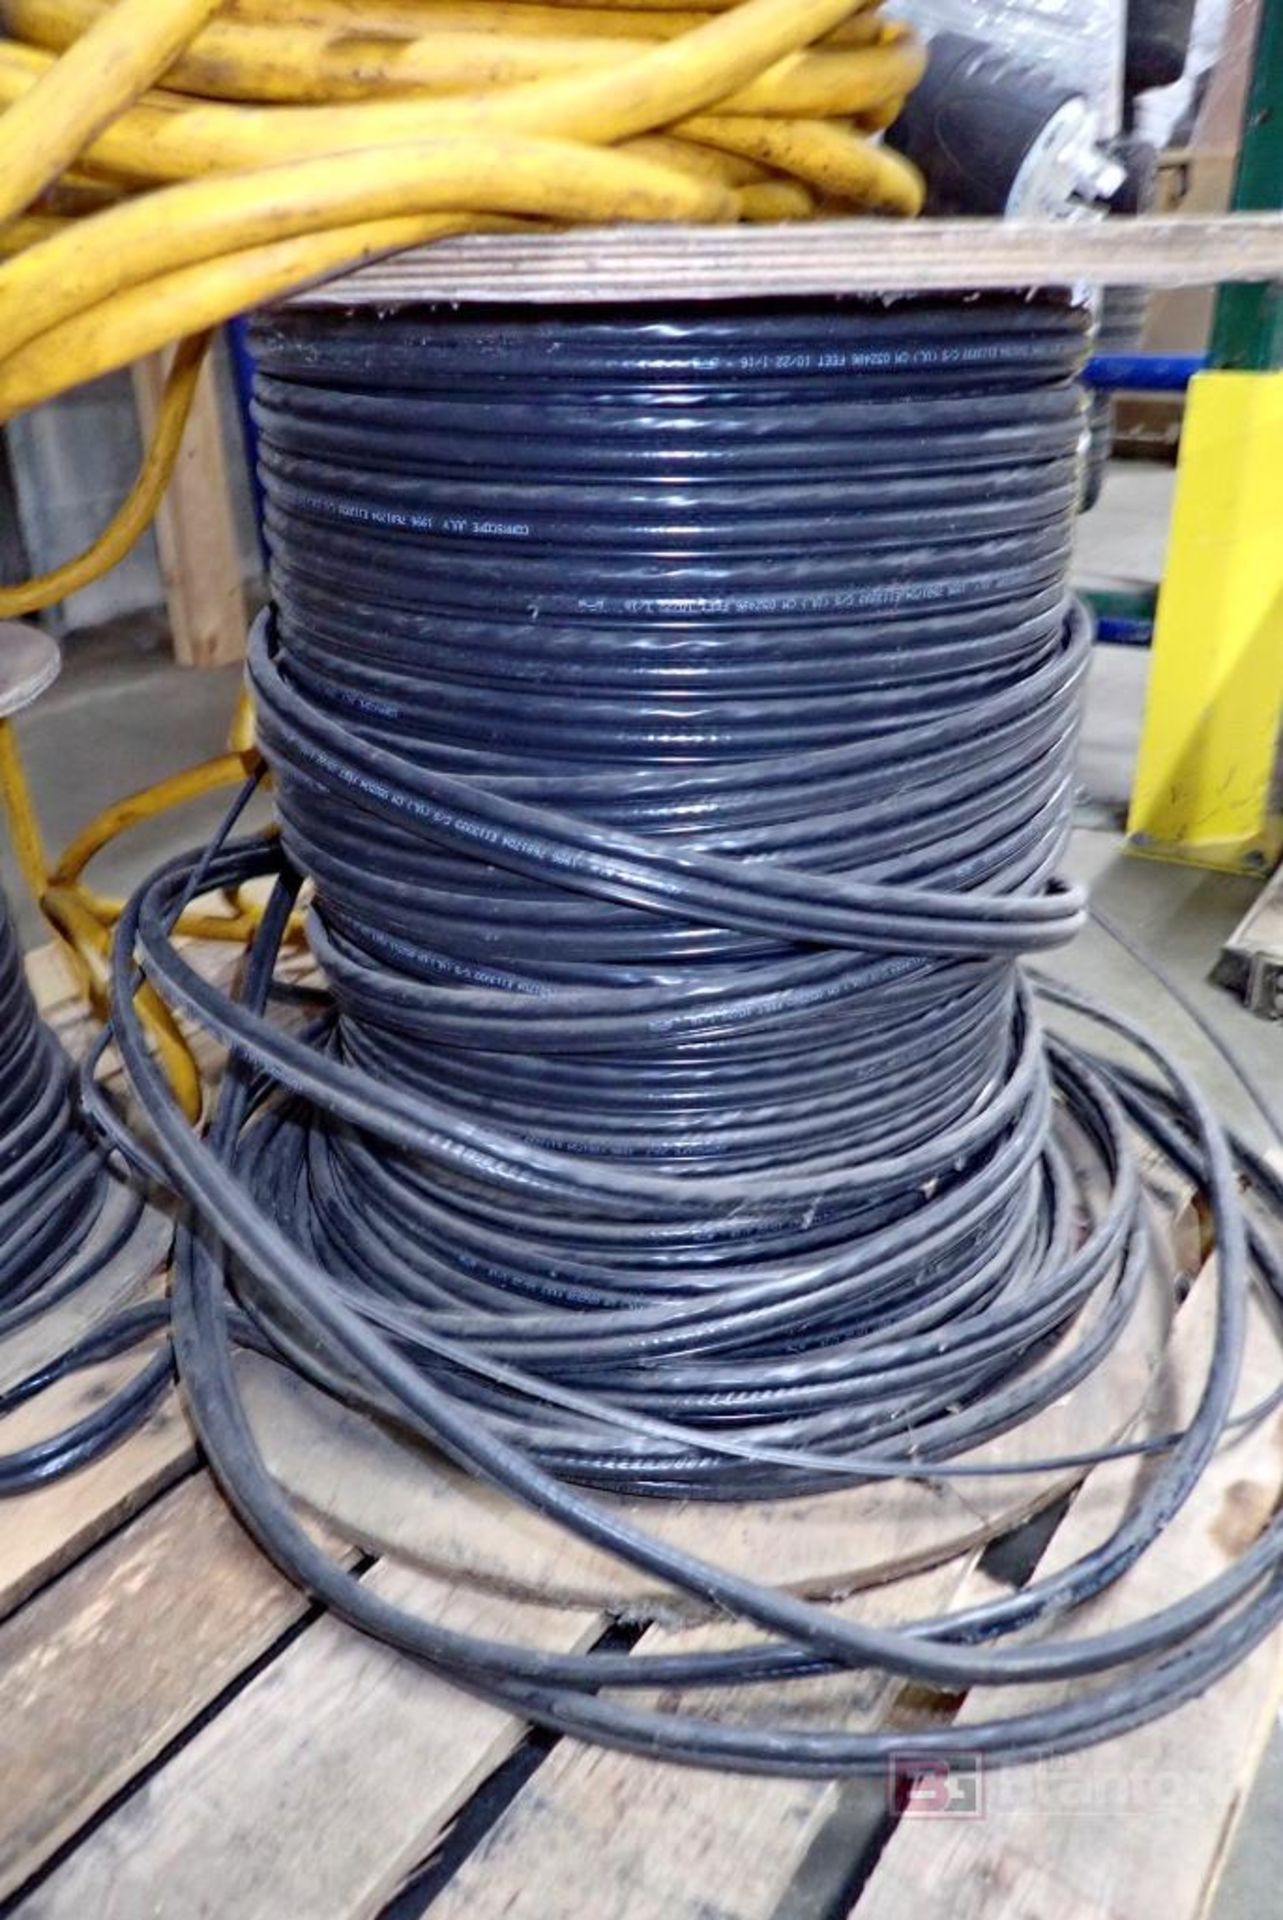 Pallet of Spooled Wire - Image 4 of 4